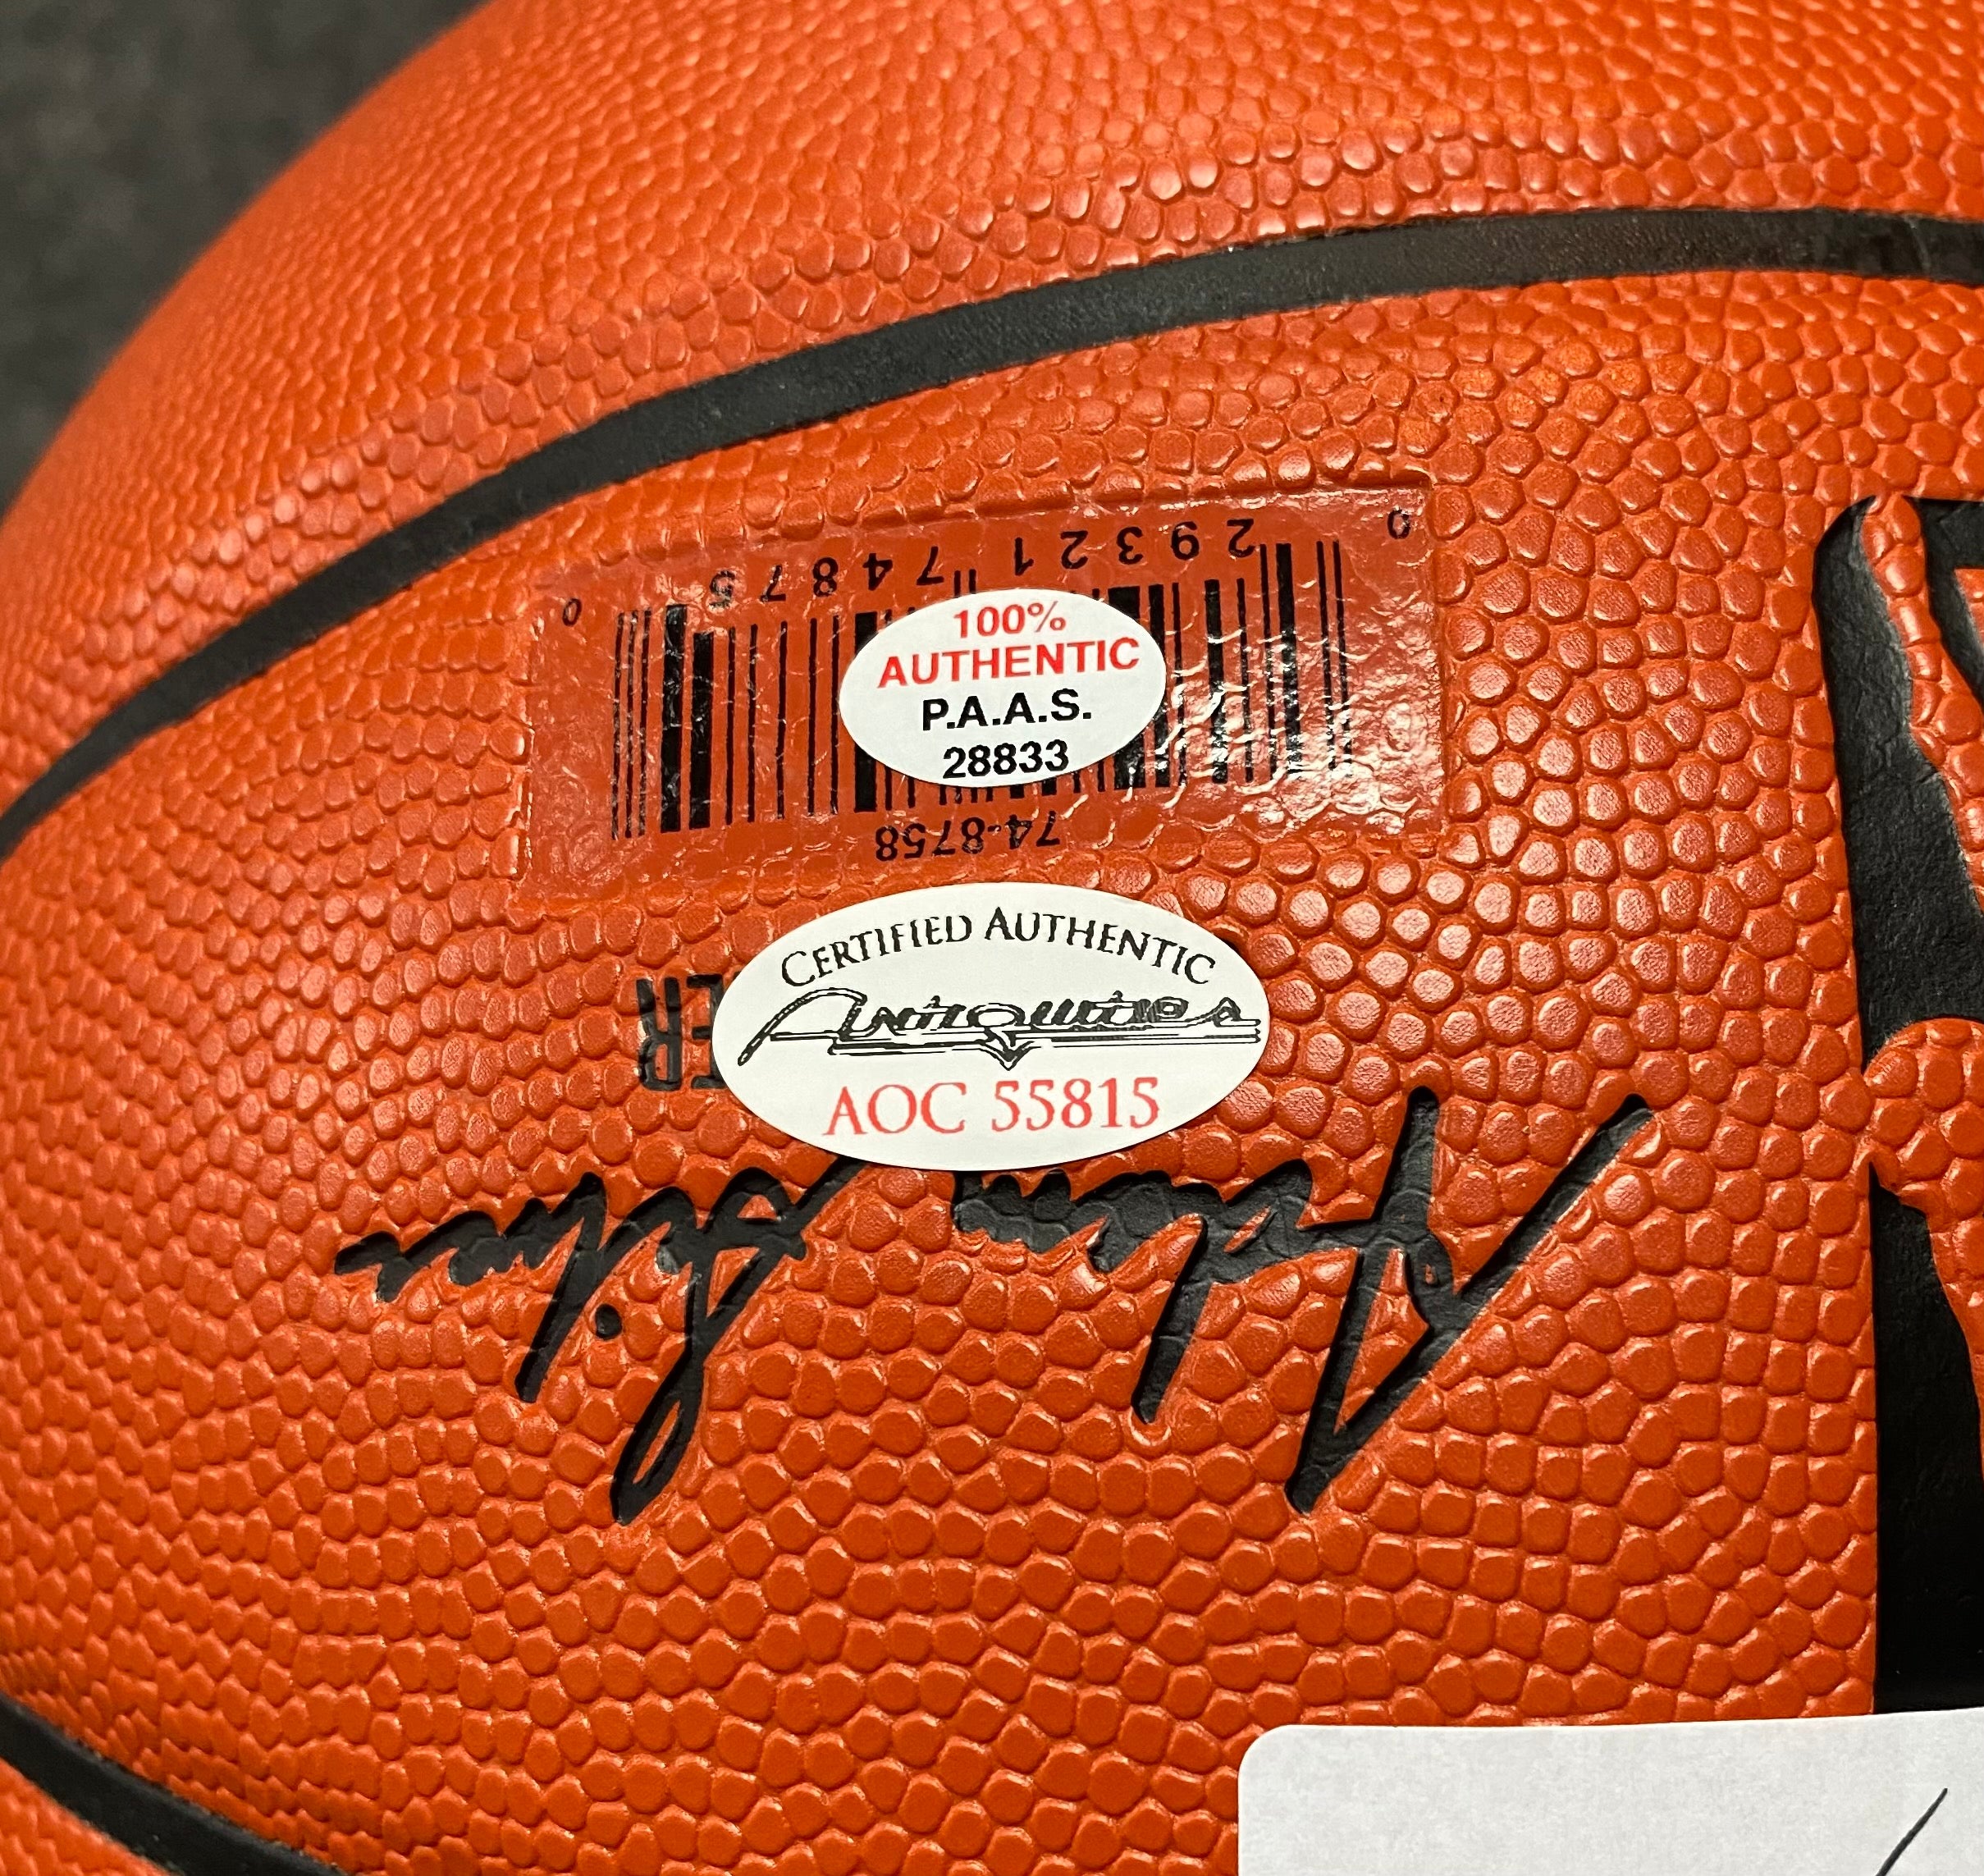 Stephen Curry Autographed 3x Champs Gold Finals Spalding Basketball - BAS